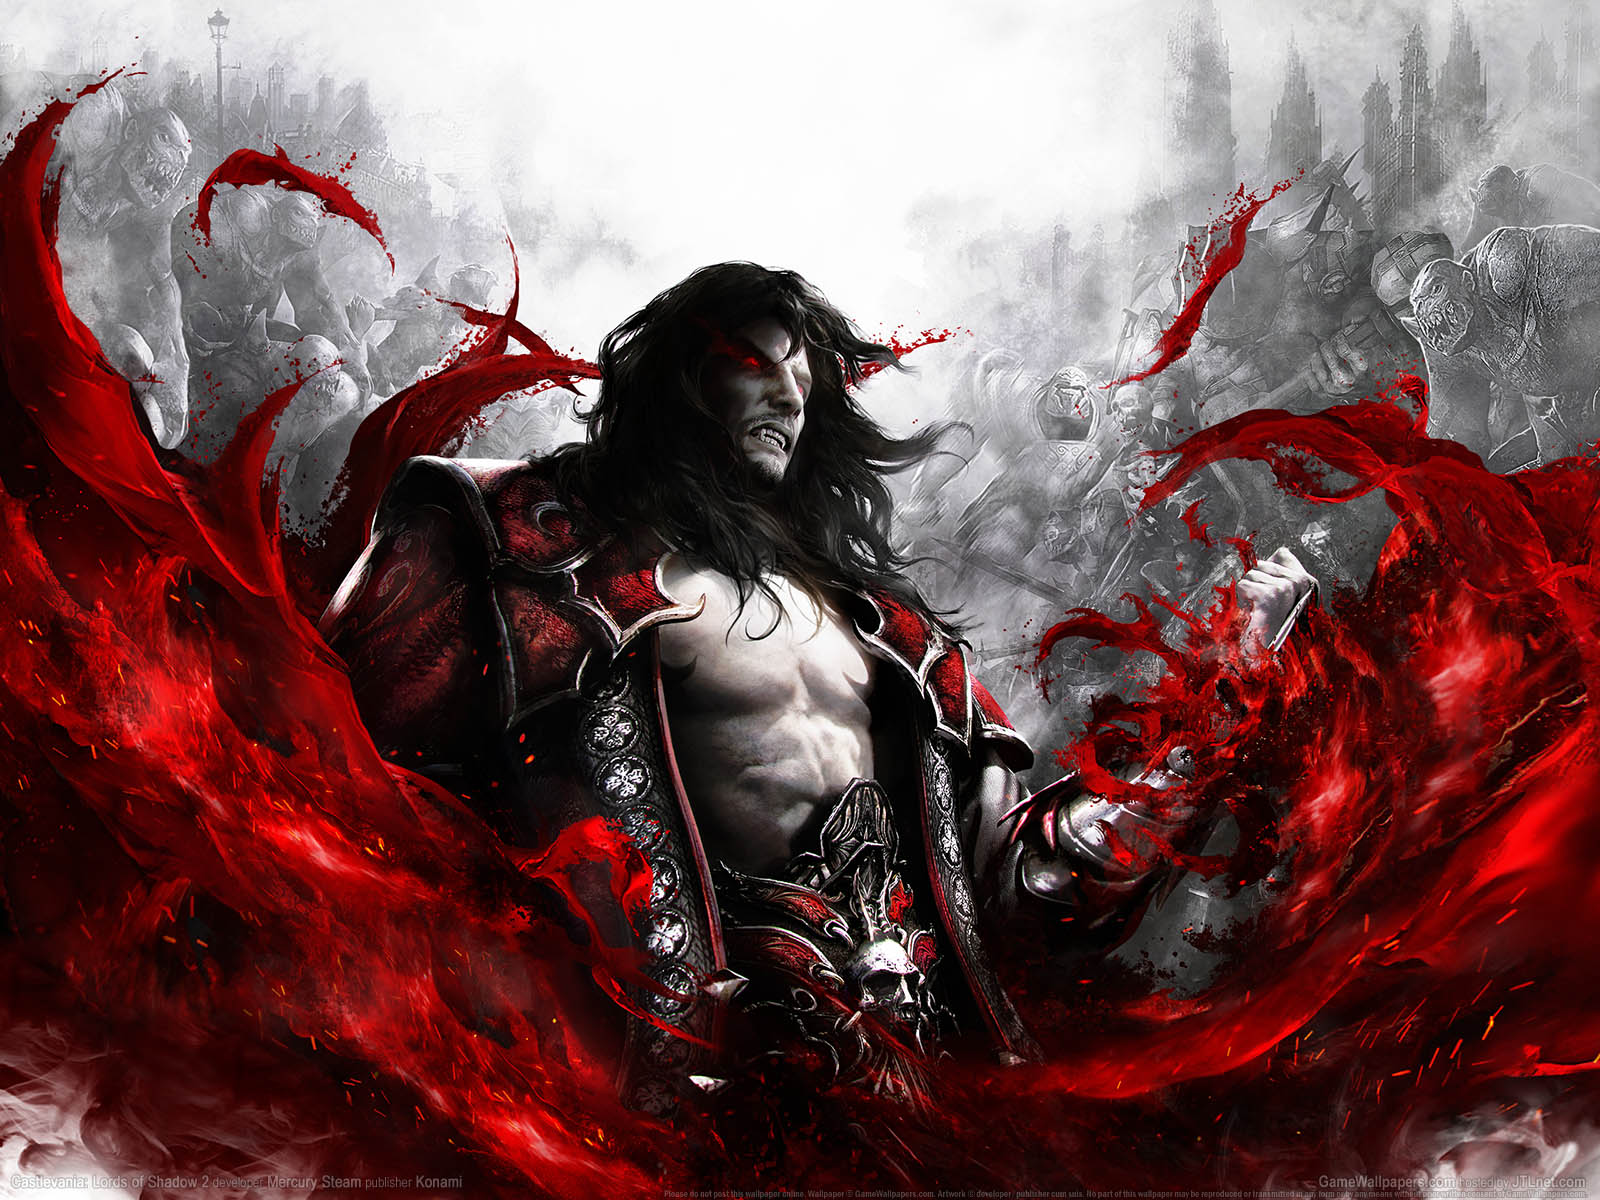 Castlevania%3A Lords of Shadow 2 achtergrond 03 1600x1200